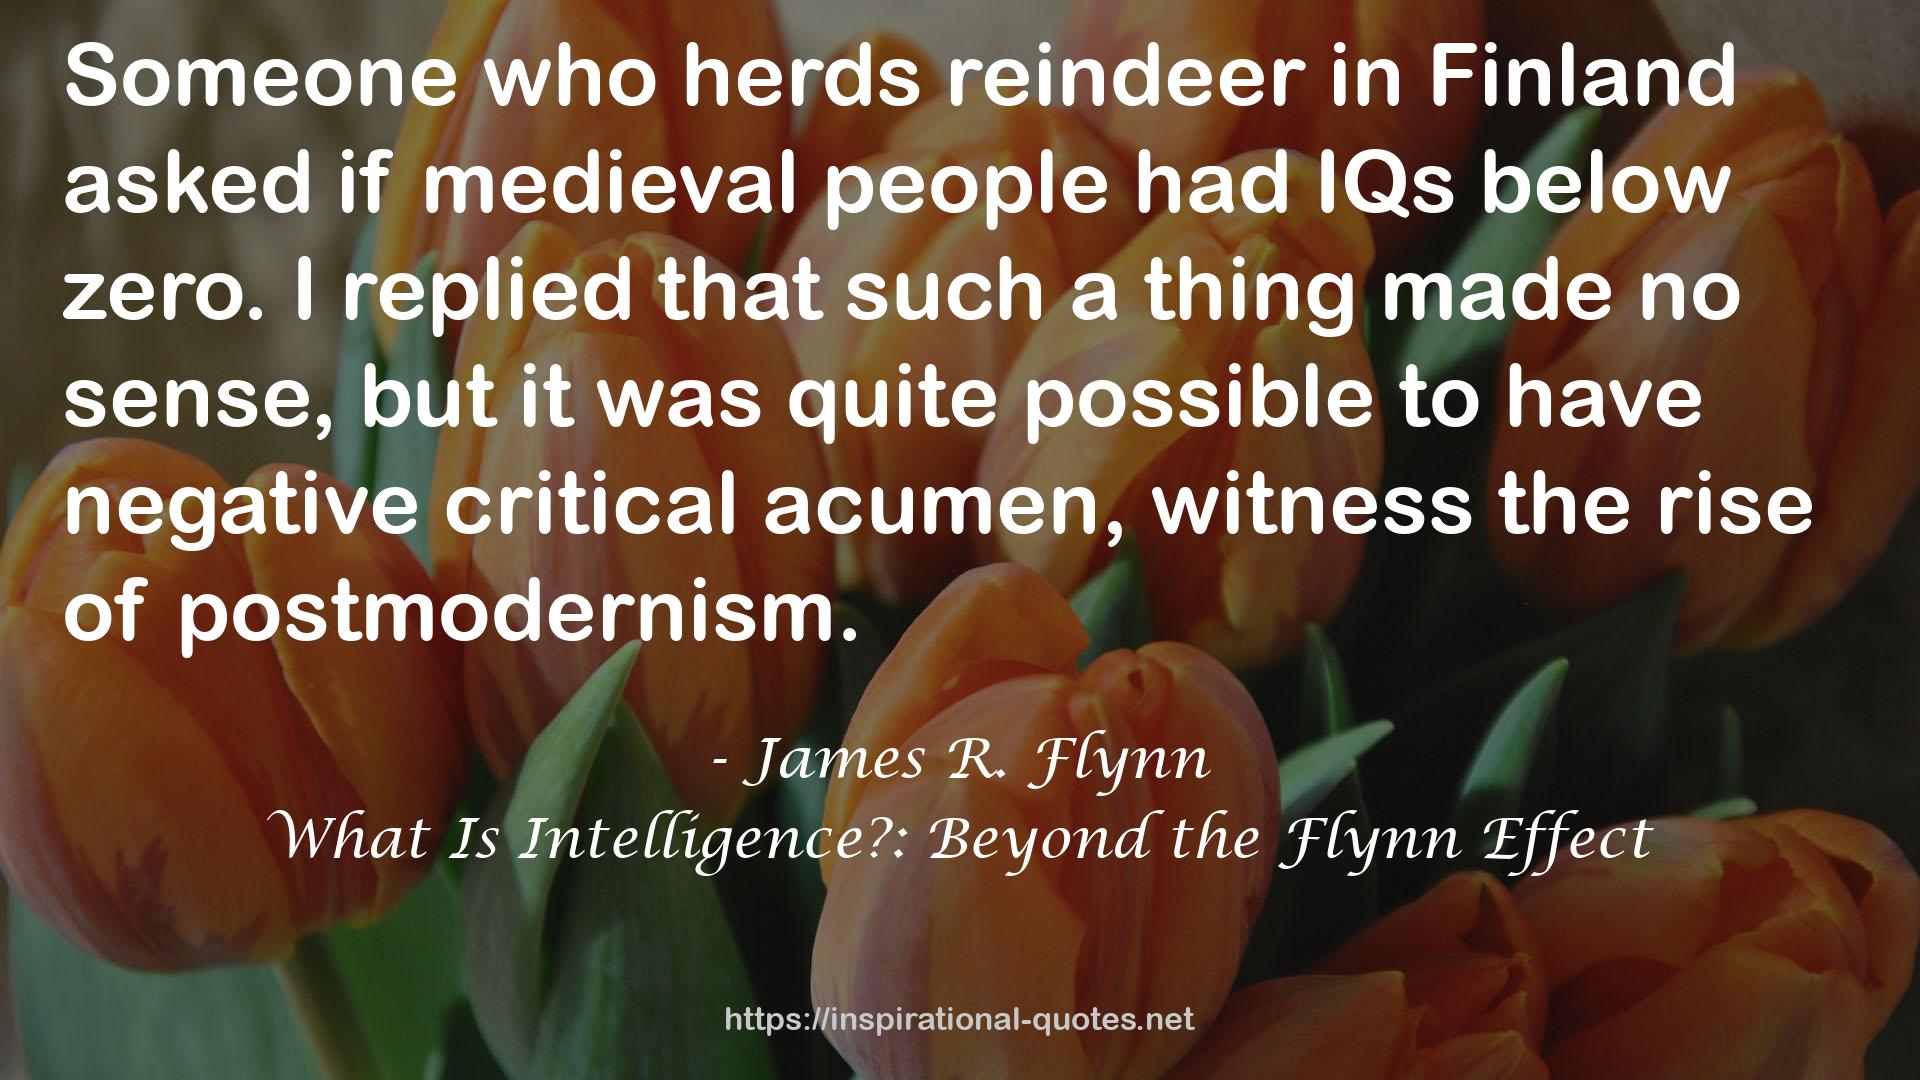 What Is Intelligence?: Beyond the Flynn Effect QUOTES